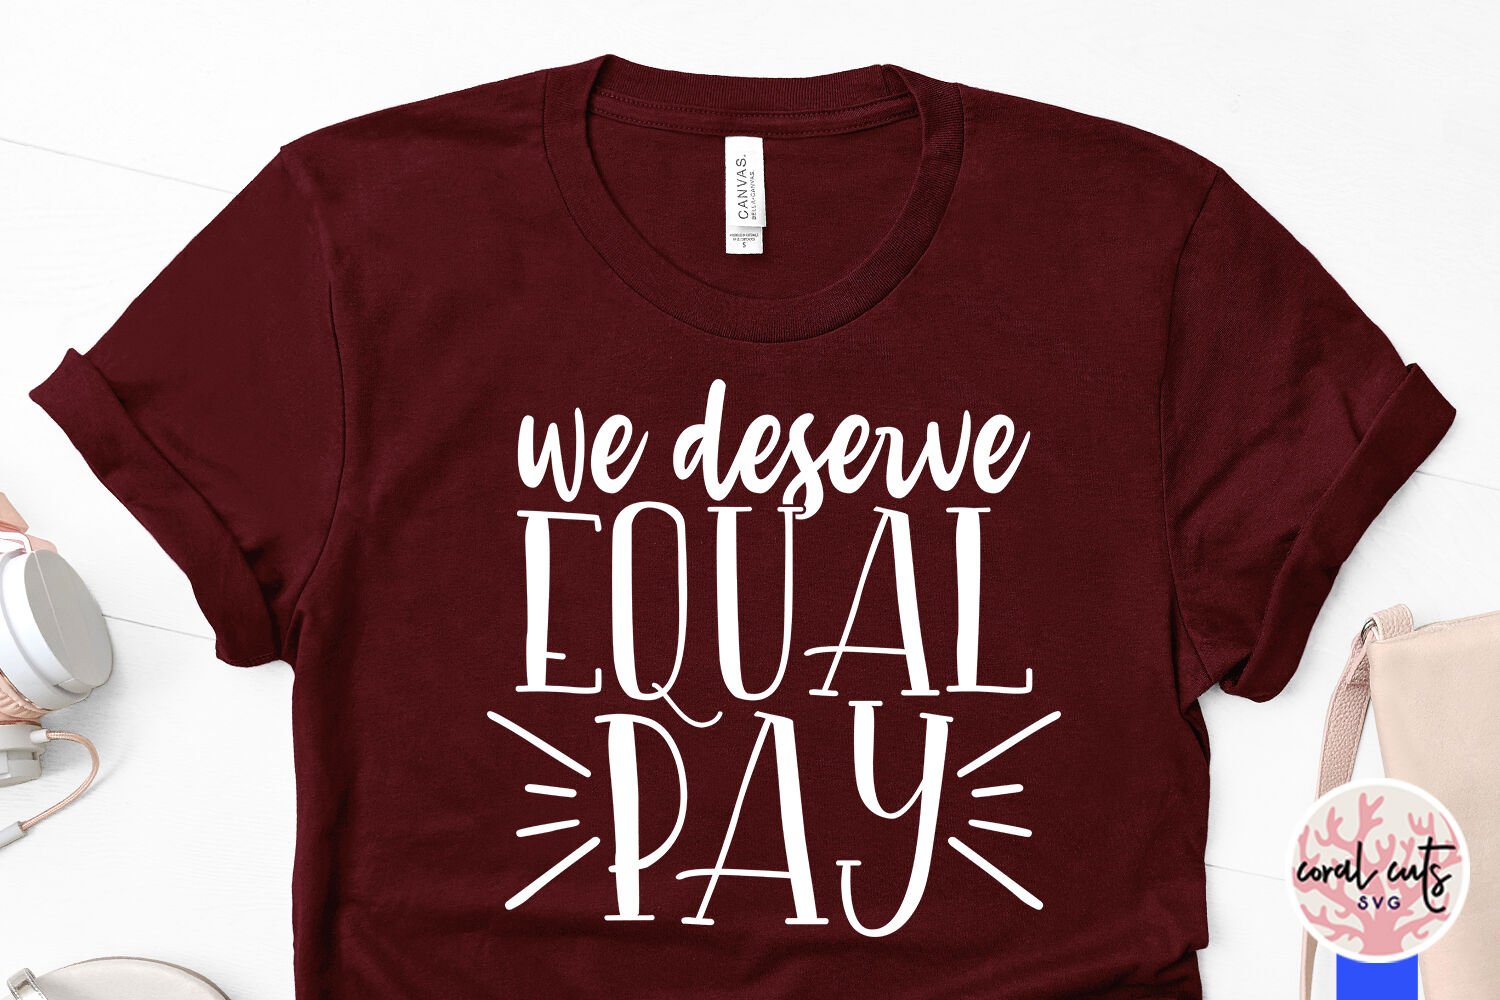 We deserve equal pay - Women Empowerment SVG EPS DXF PNG By CoralCuts ...